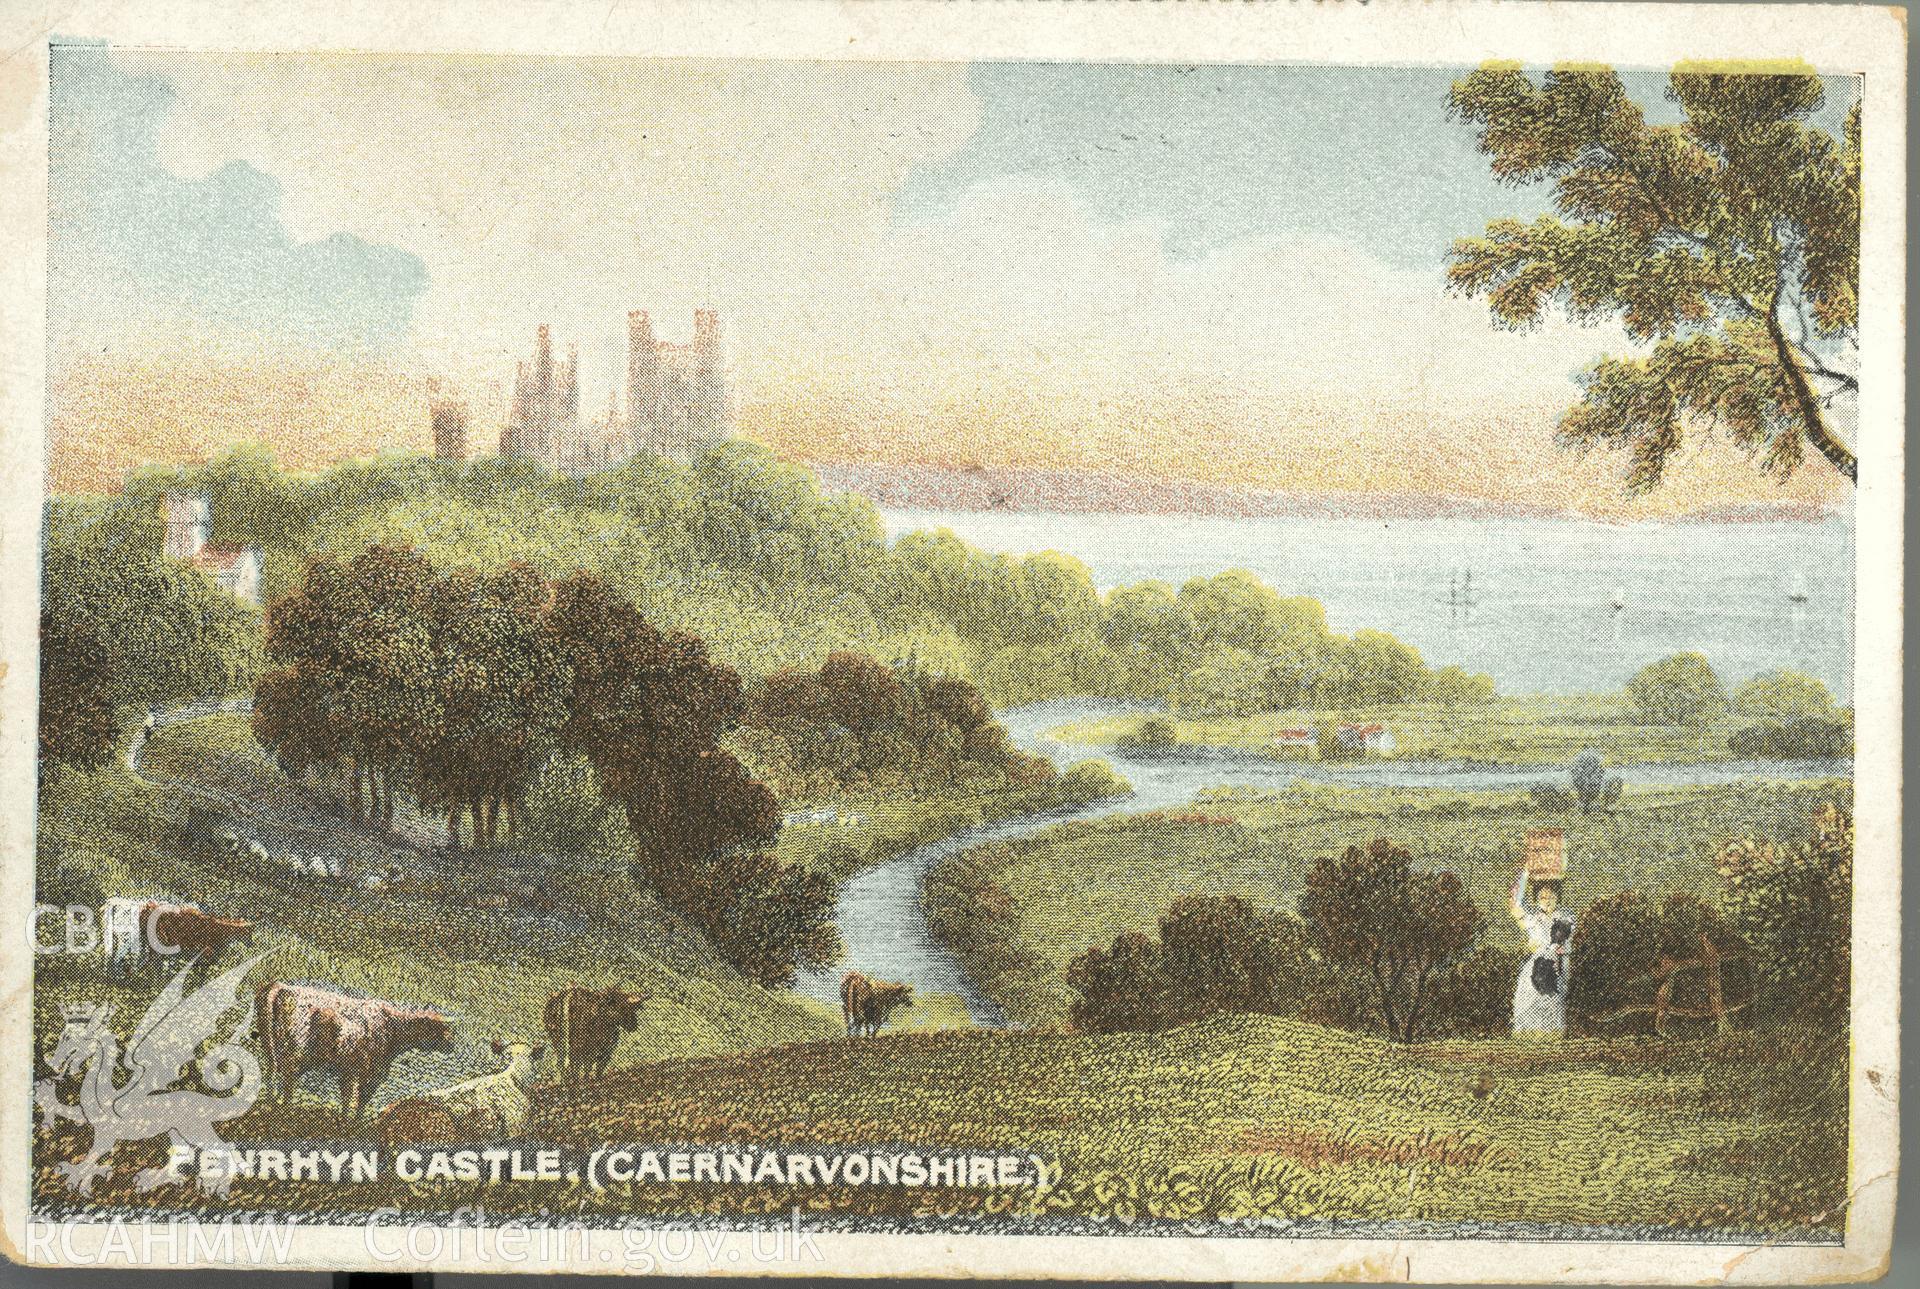 Digitised postcard image of coloured etching of Penrhyn Castle, Bangor. Produced by Parks and Gardens Data Services, from an original item in the Peter Davis Collection at Parks and Gardens UK. We hold only web-resolution images of this collection, suitable for viewing on screen and for research purposes only. We do not hold the original images, or publication quality scans.